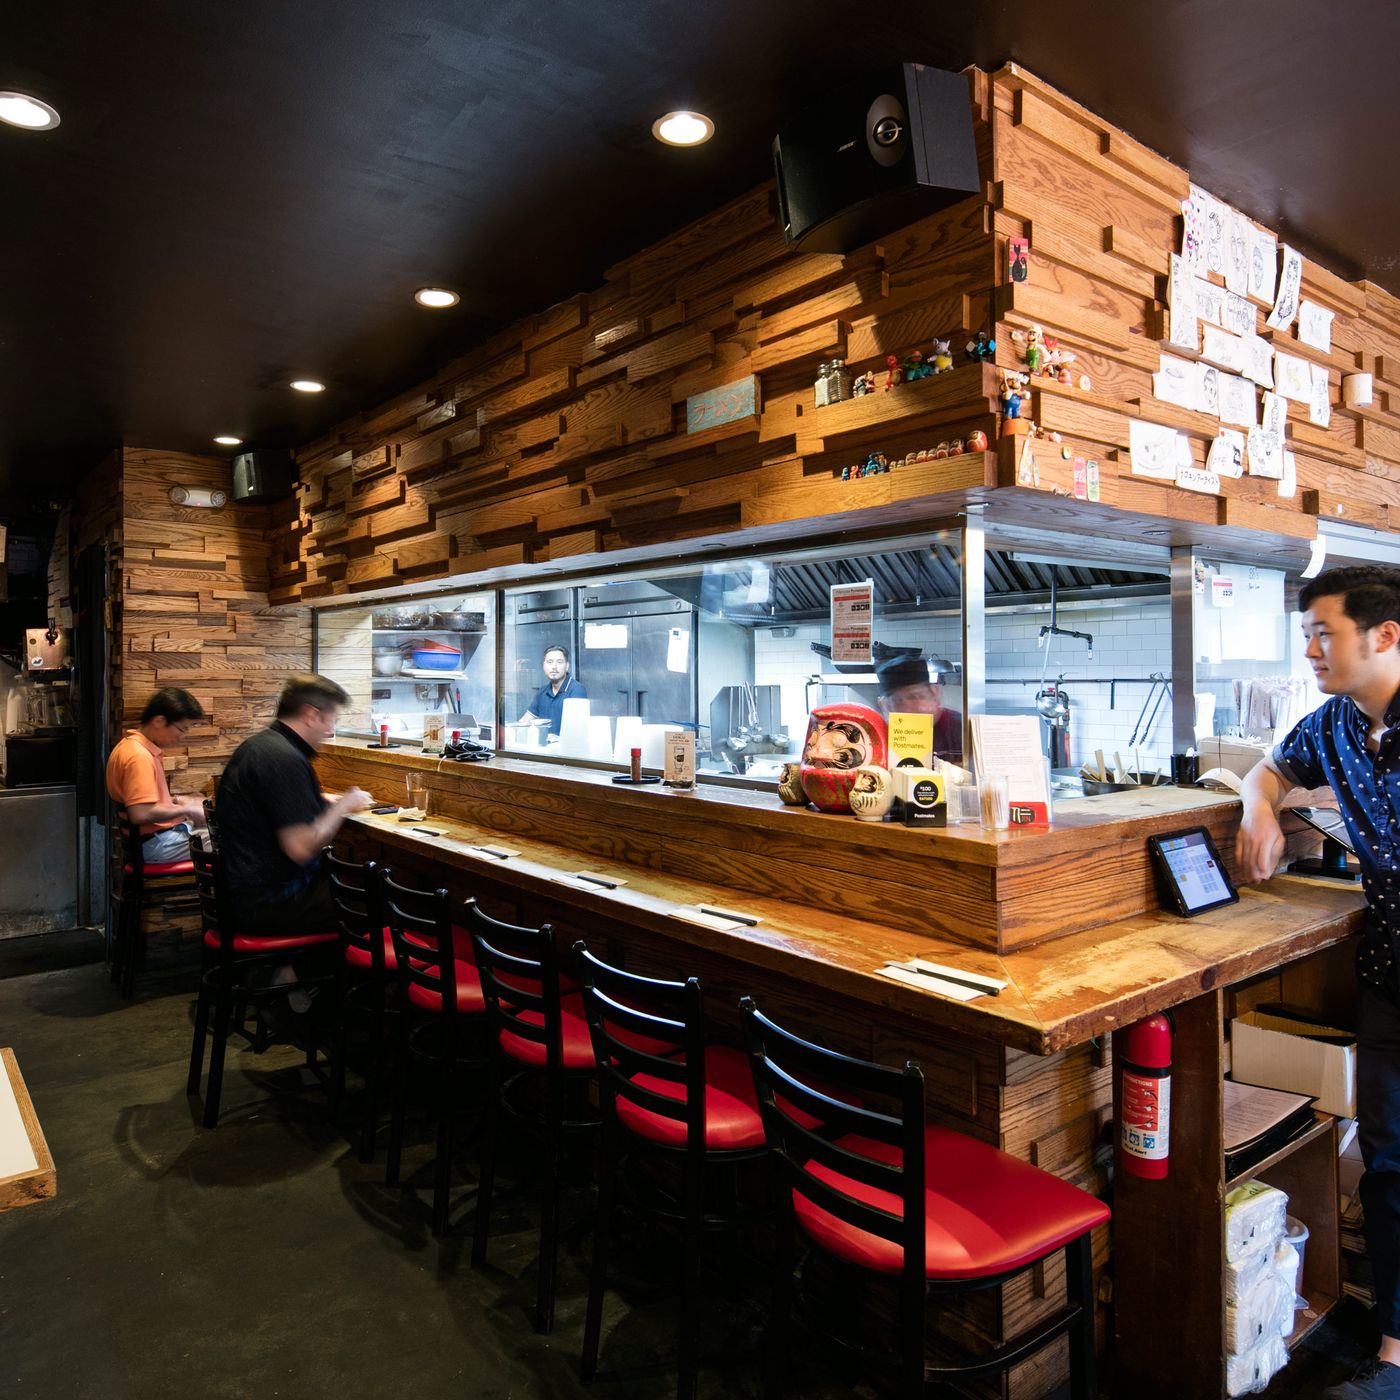 The Great List of Fast Food Reviews: Nori Japan